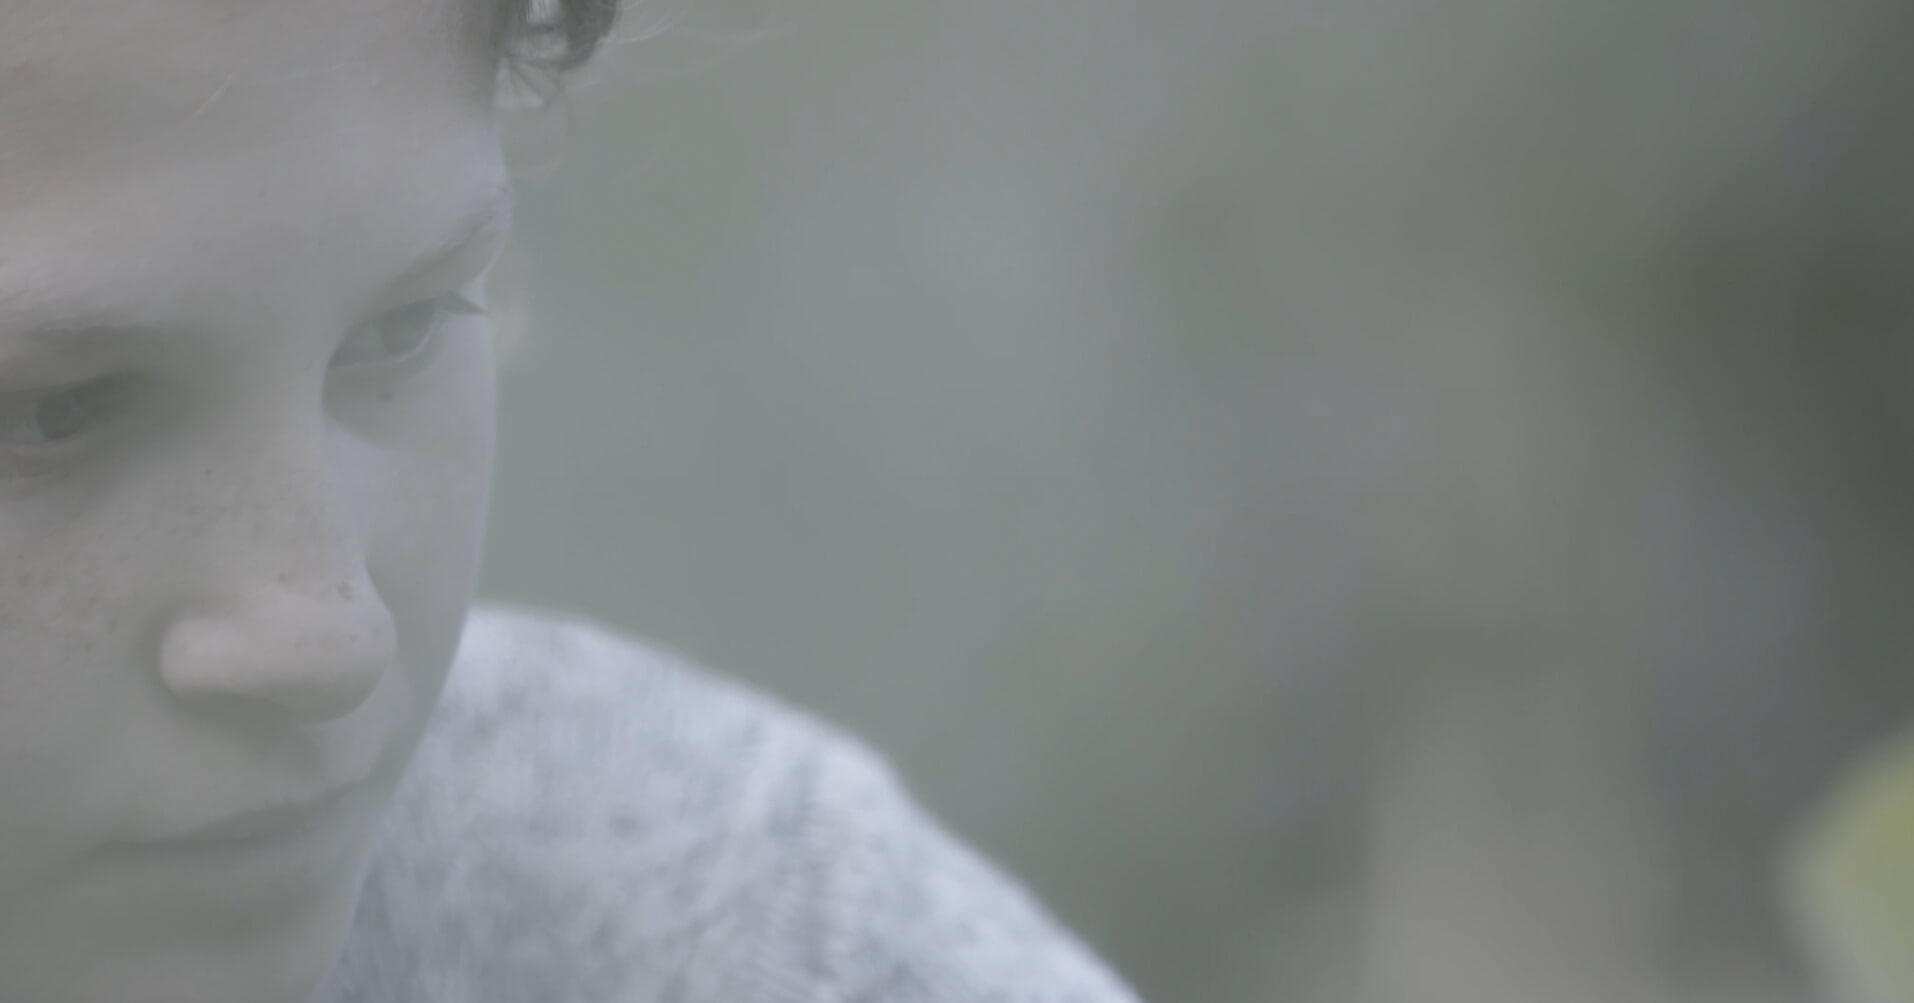 A still from The Last Nomads. Close-up shot of a person's face. They are looking down slightly, although still facing the camera. The image is hazy and slightly out of focus. The person is situated in front of a green background.